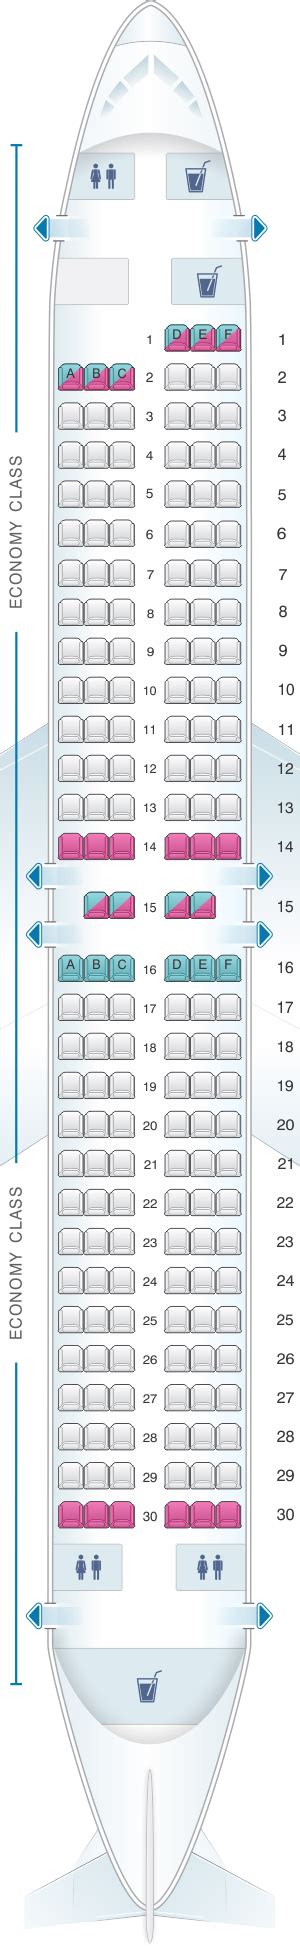 Southwest airlines seat map. If you want to make a change to a reservation with a. Companion or a minor, please visit the links below: Changing reservations for Companions FAQ. Changing reservations for Minors FAQ. *Fare difference may apply. Modify or change your existing Southwest Airlines reservation here. Easily change or modify your flight with your confirmation number. 